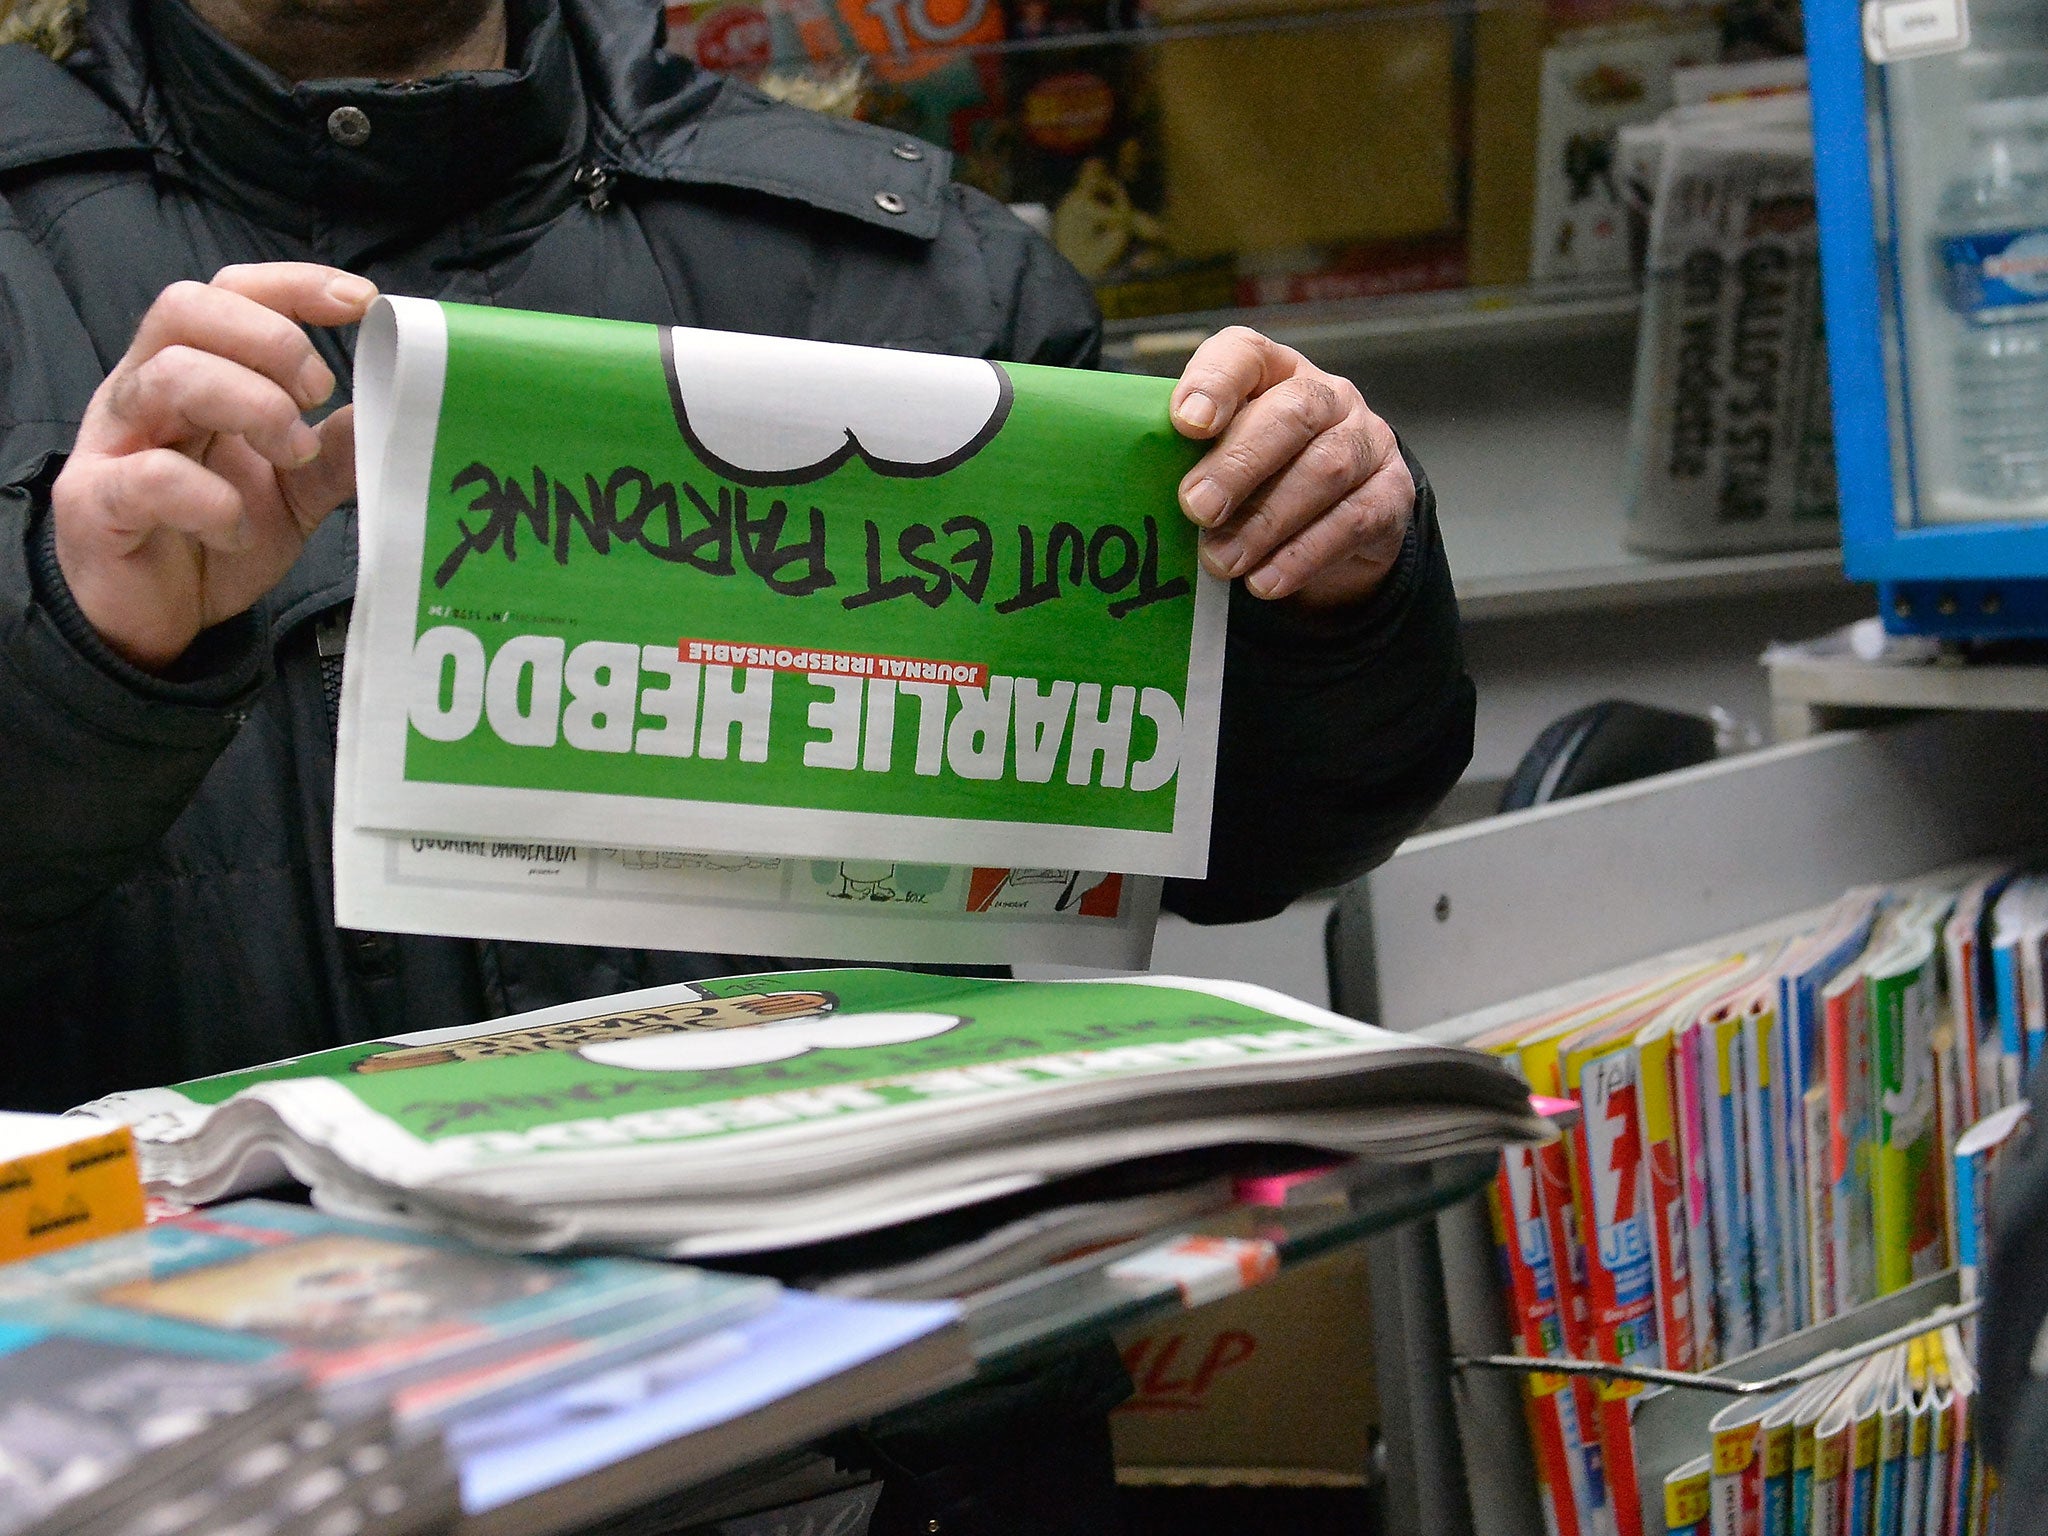 A man buys a copy of the new edition of Charlie Hebdo magazine